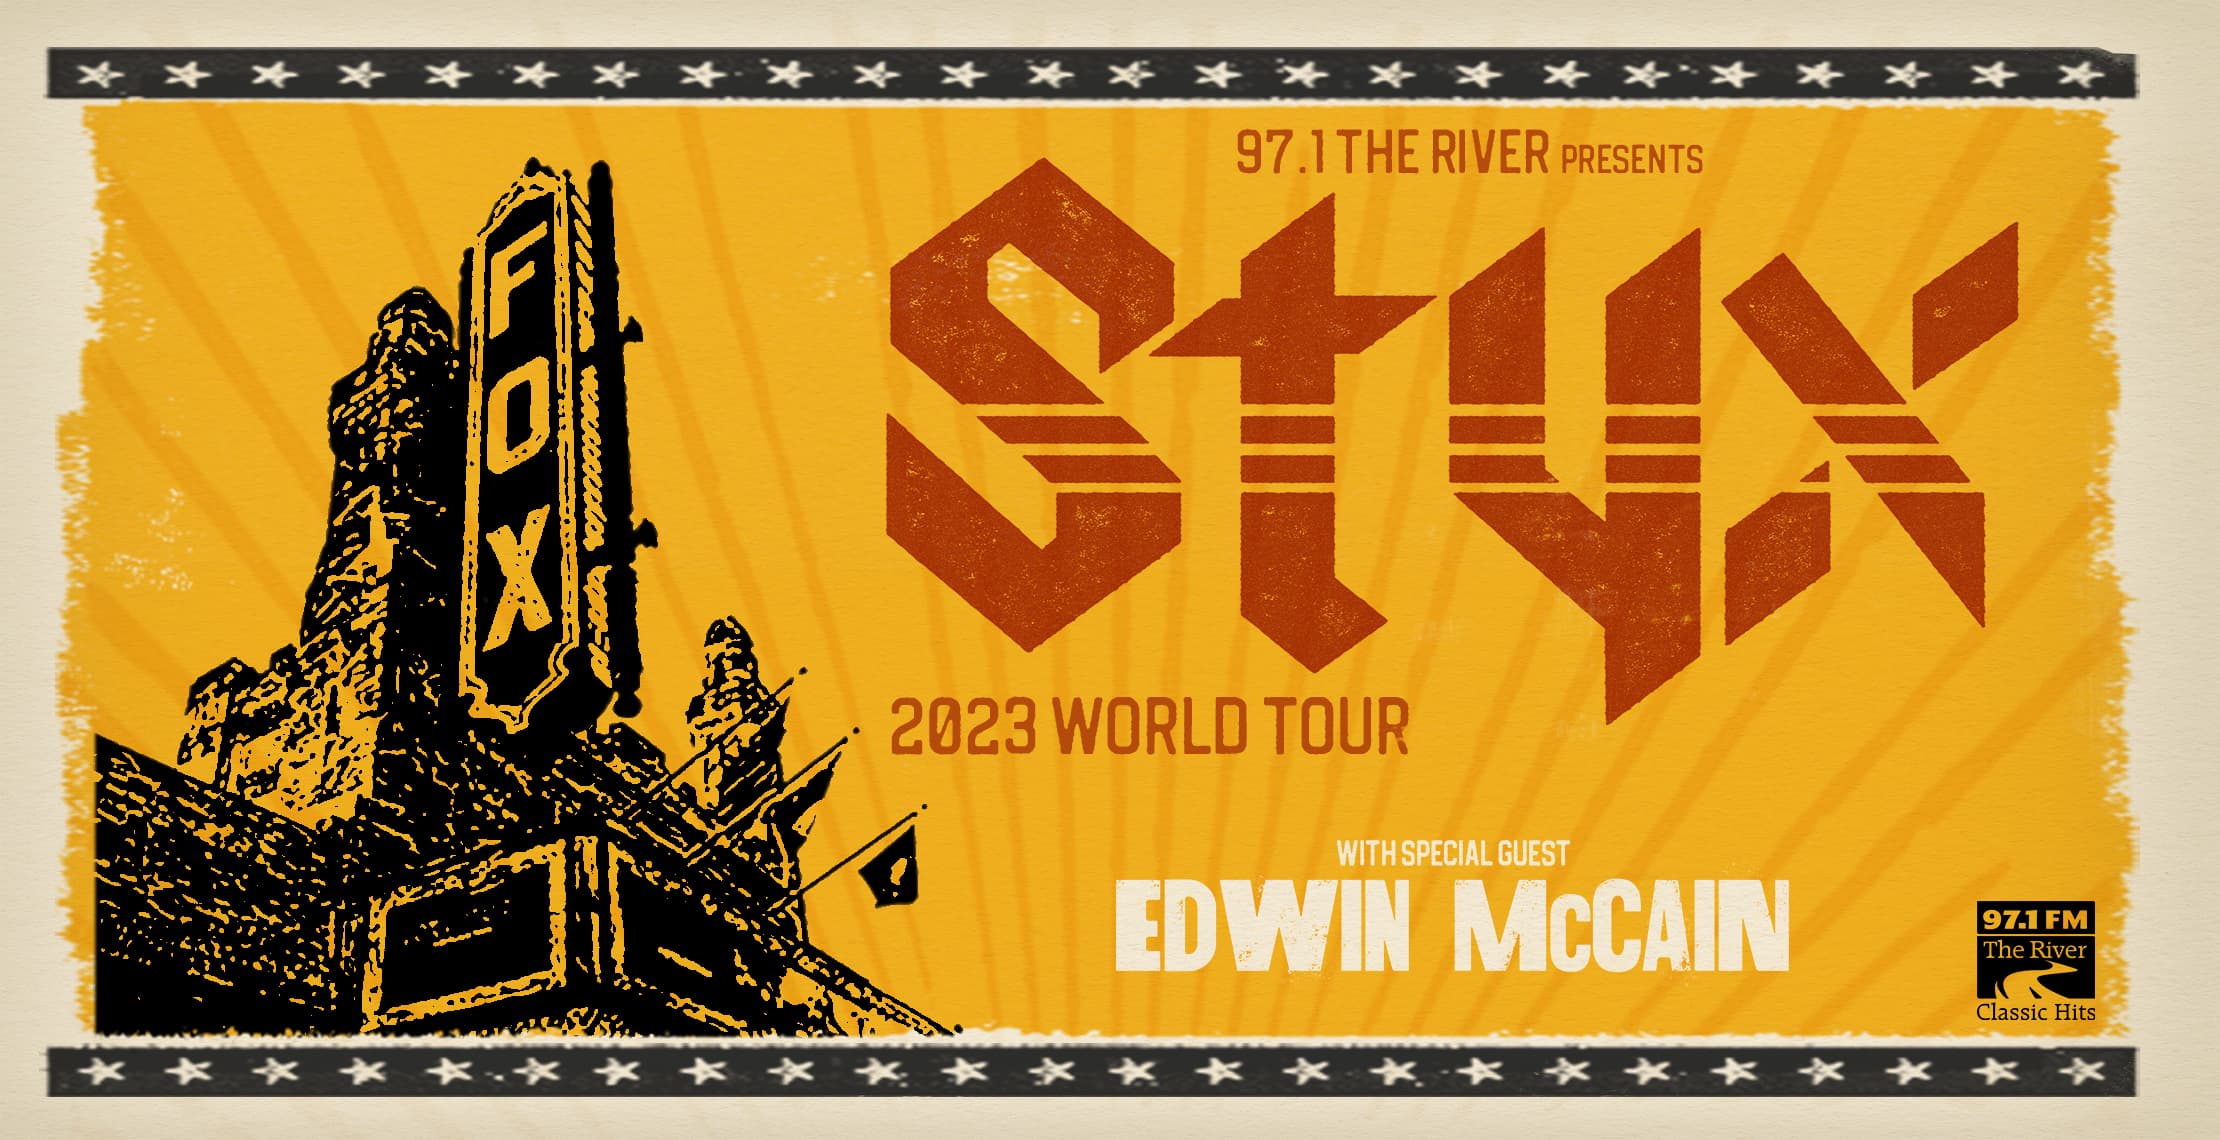 97.1 the River presents Styx: 2023 World Tour